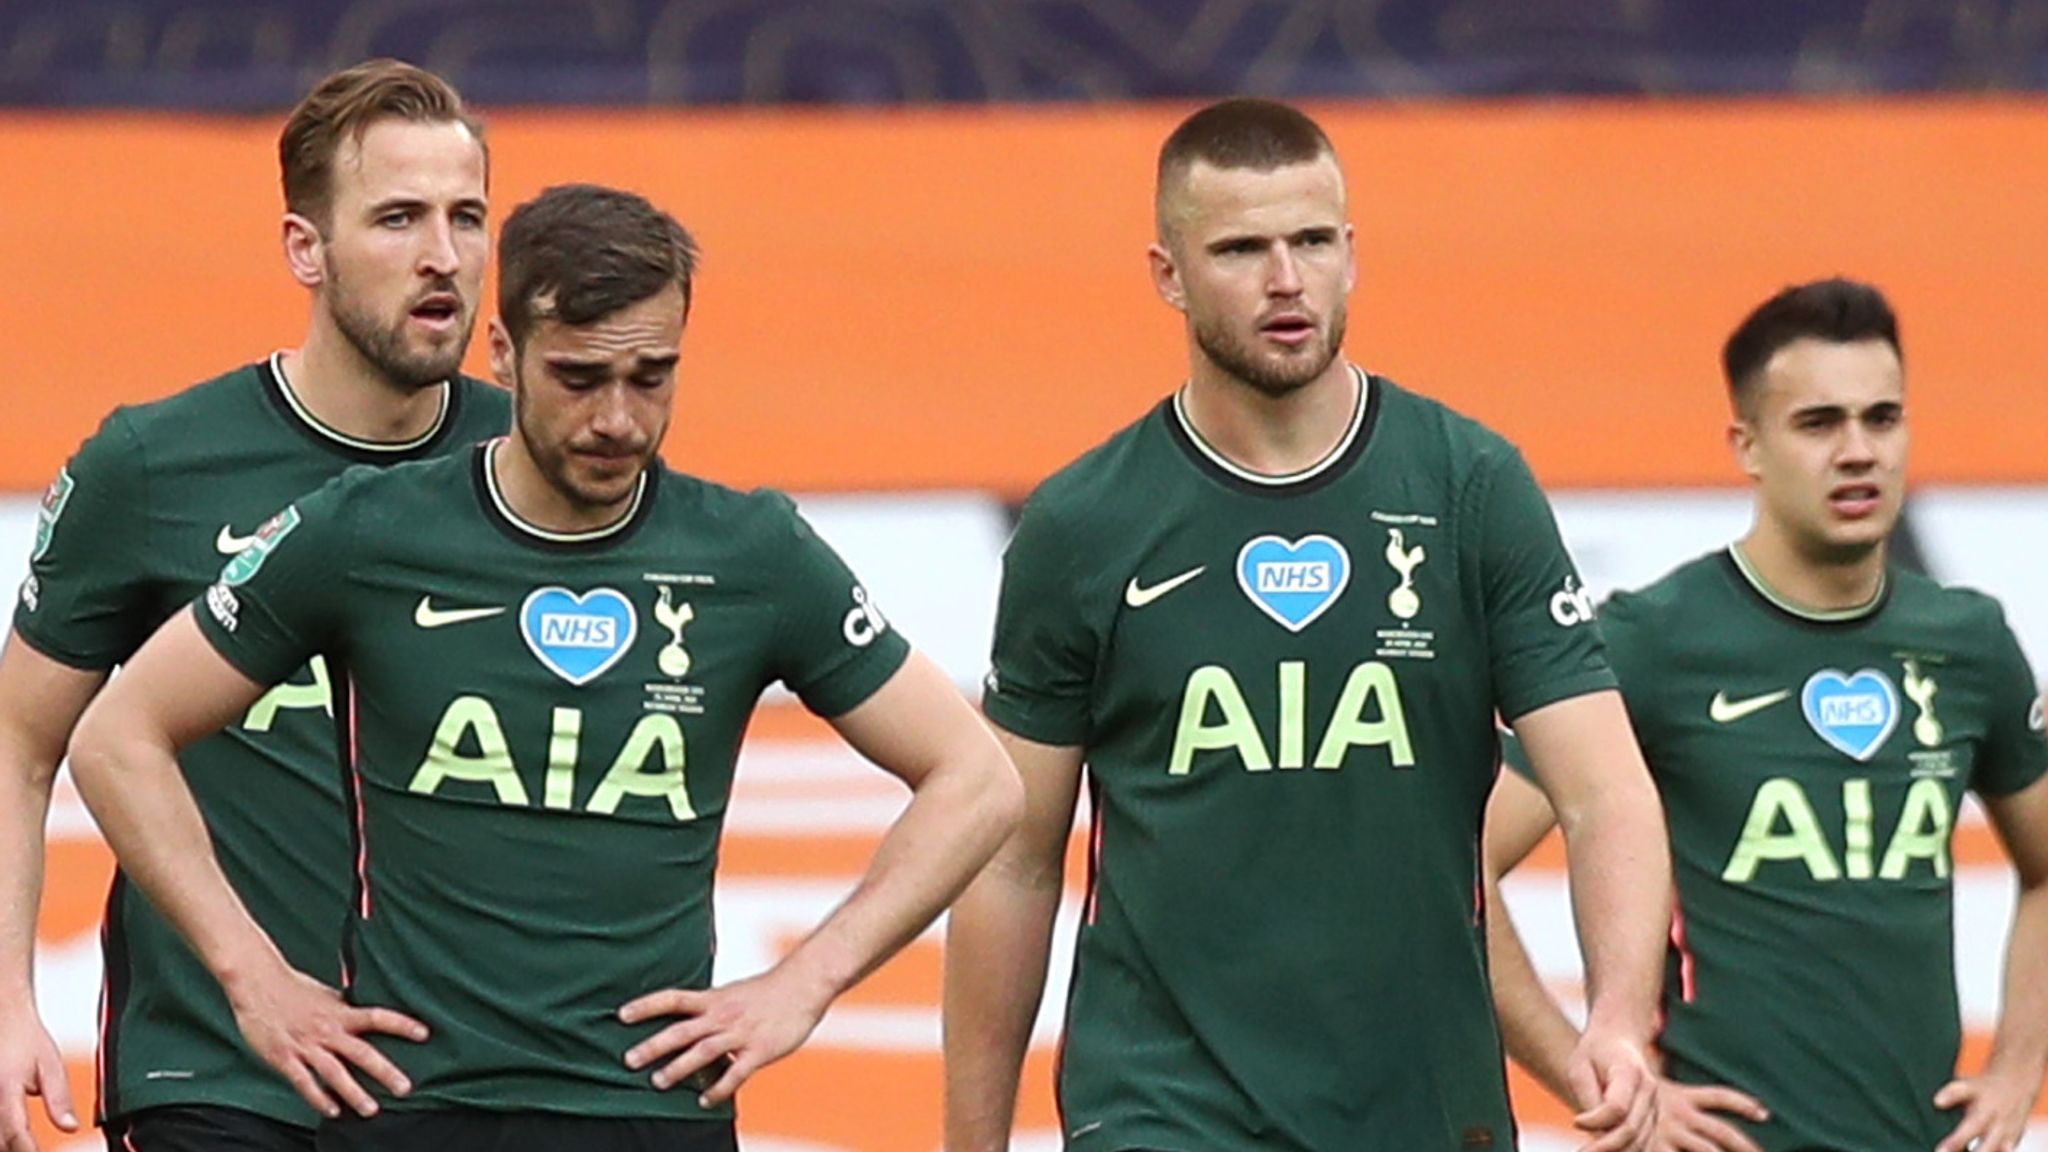 Tottenham release new third kits, will debut them vs. Fulham in Carabao Cup  - Cartilage Free Captain